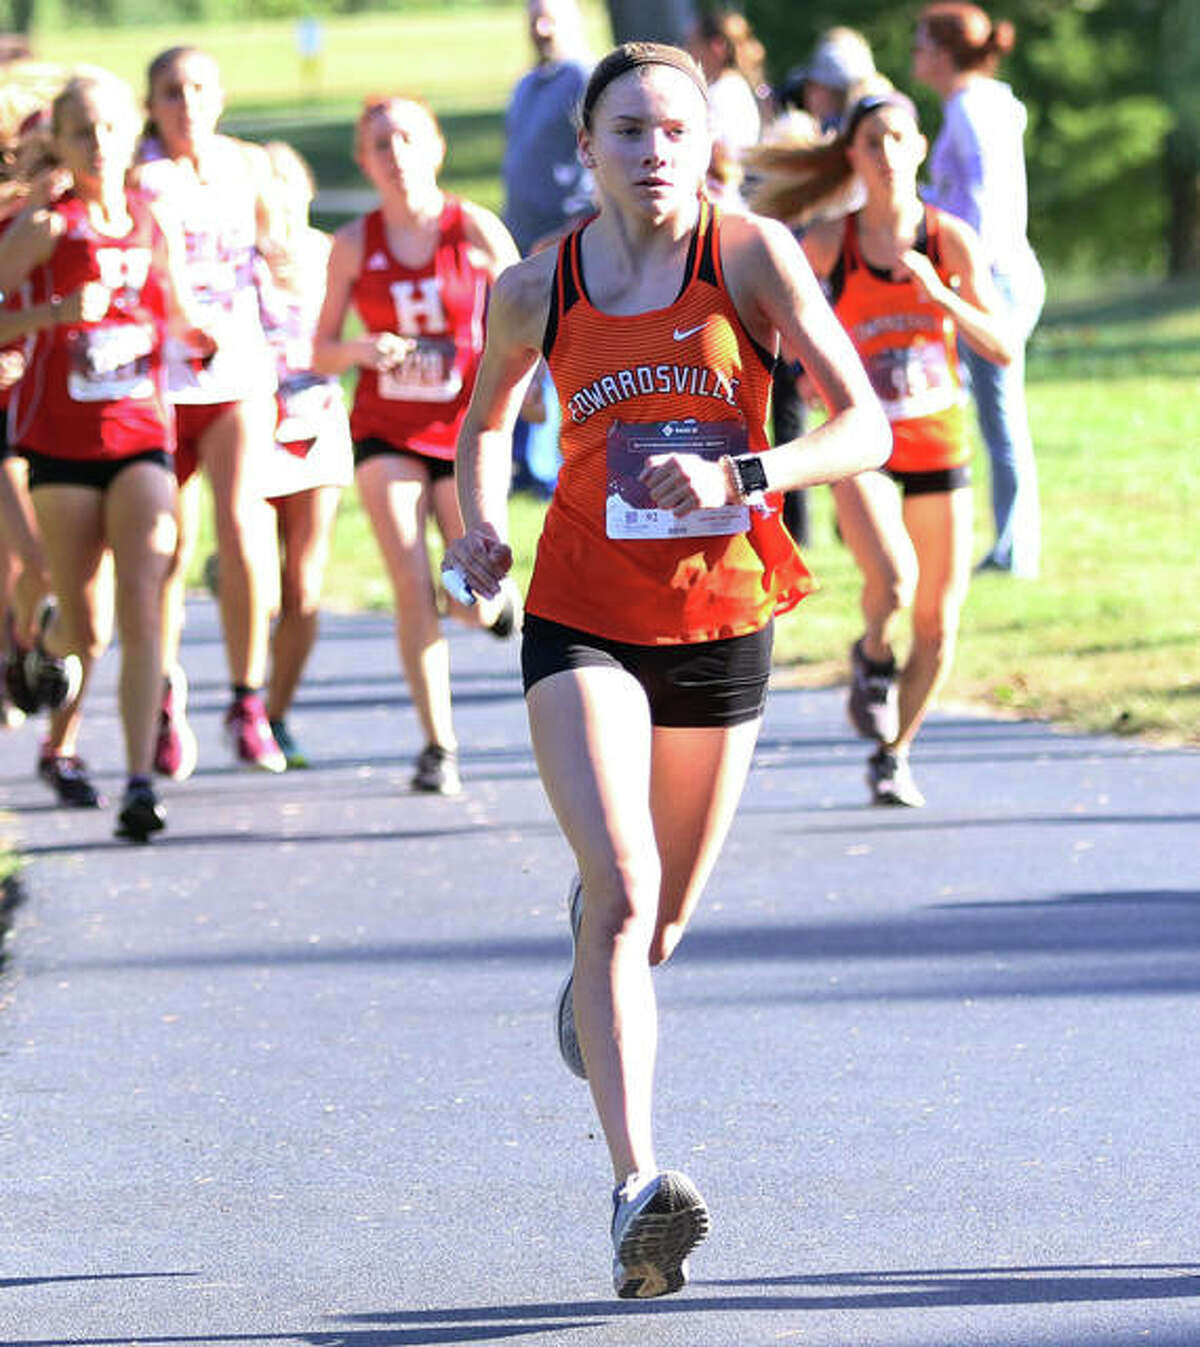 Edwardsville freshman Riley Knoyle, shown on her way to victory at the Madison County Meet on Oct. 8 at Belk Park in Wood River, added another win Thursday at the Southwestern Conference Meet at Moore Park in Alton.